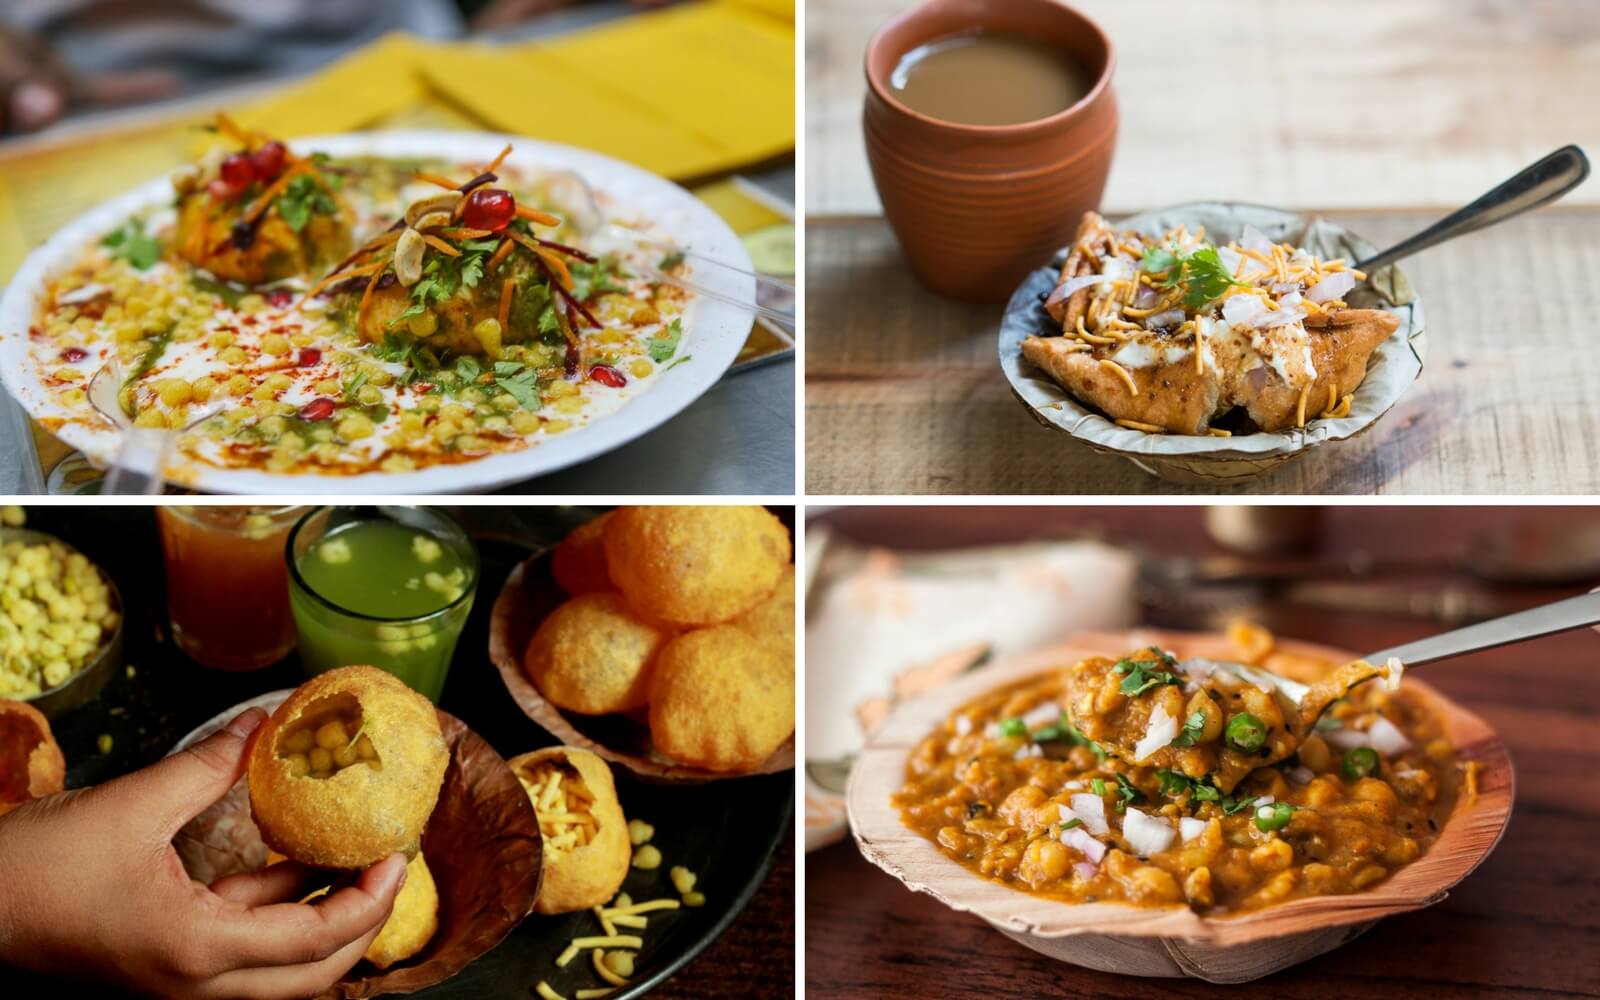 Most Popular Street Foods in India